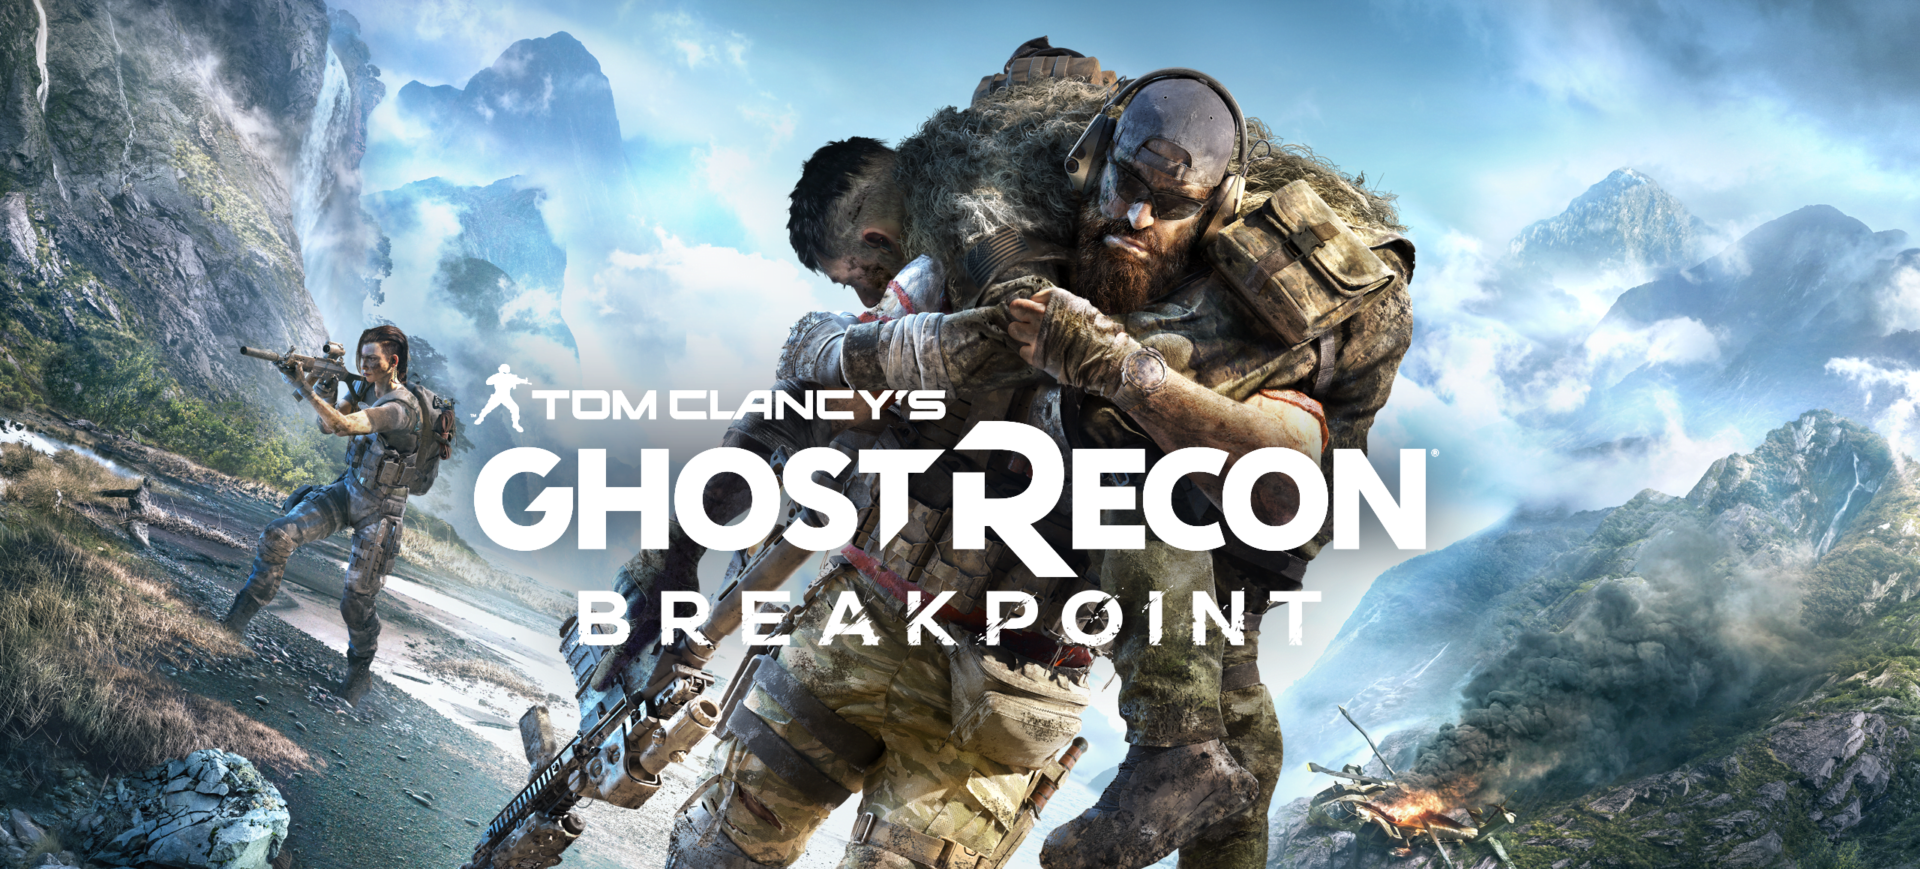 Tom Clancy's Ghost Recon Breakpoint (PS4, Xbox One, PC)